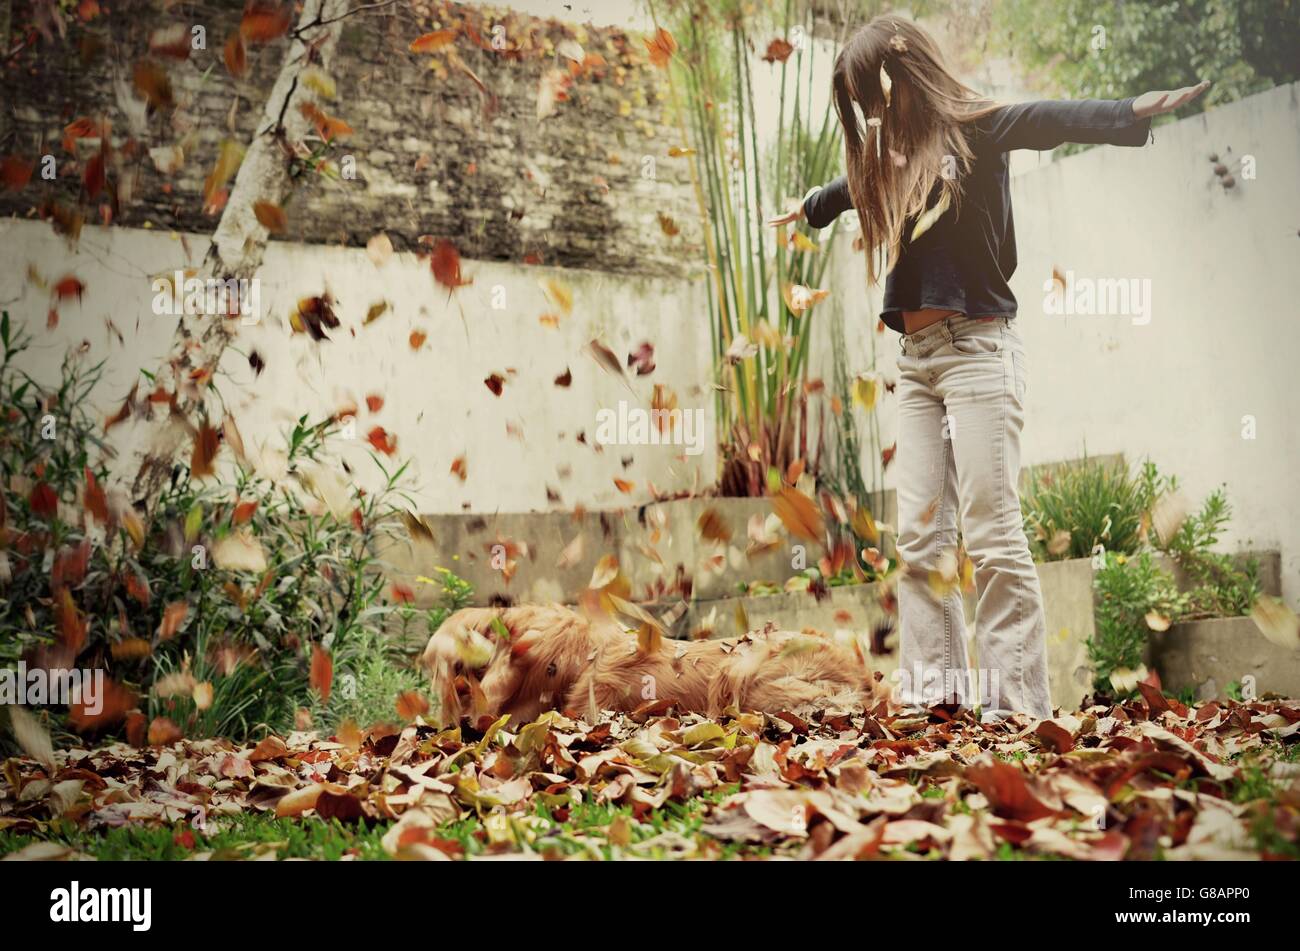 Girl and dog playing with autumn leaves in garden Stock Photo